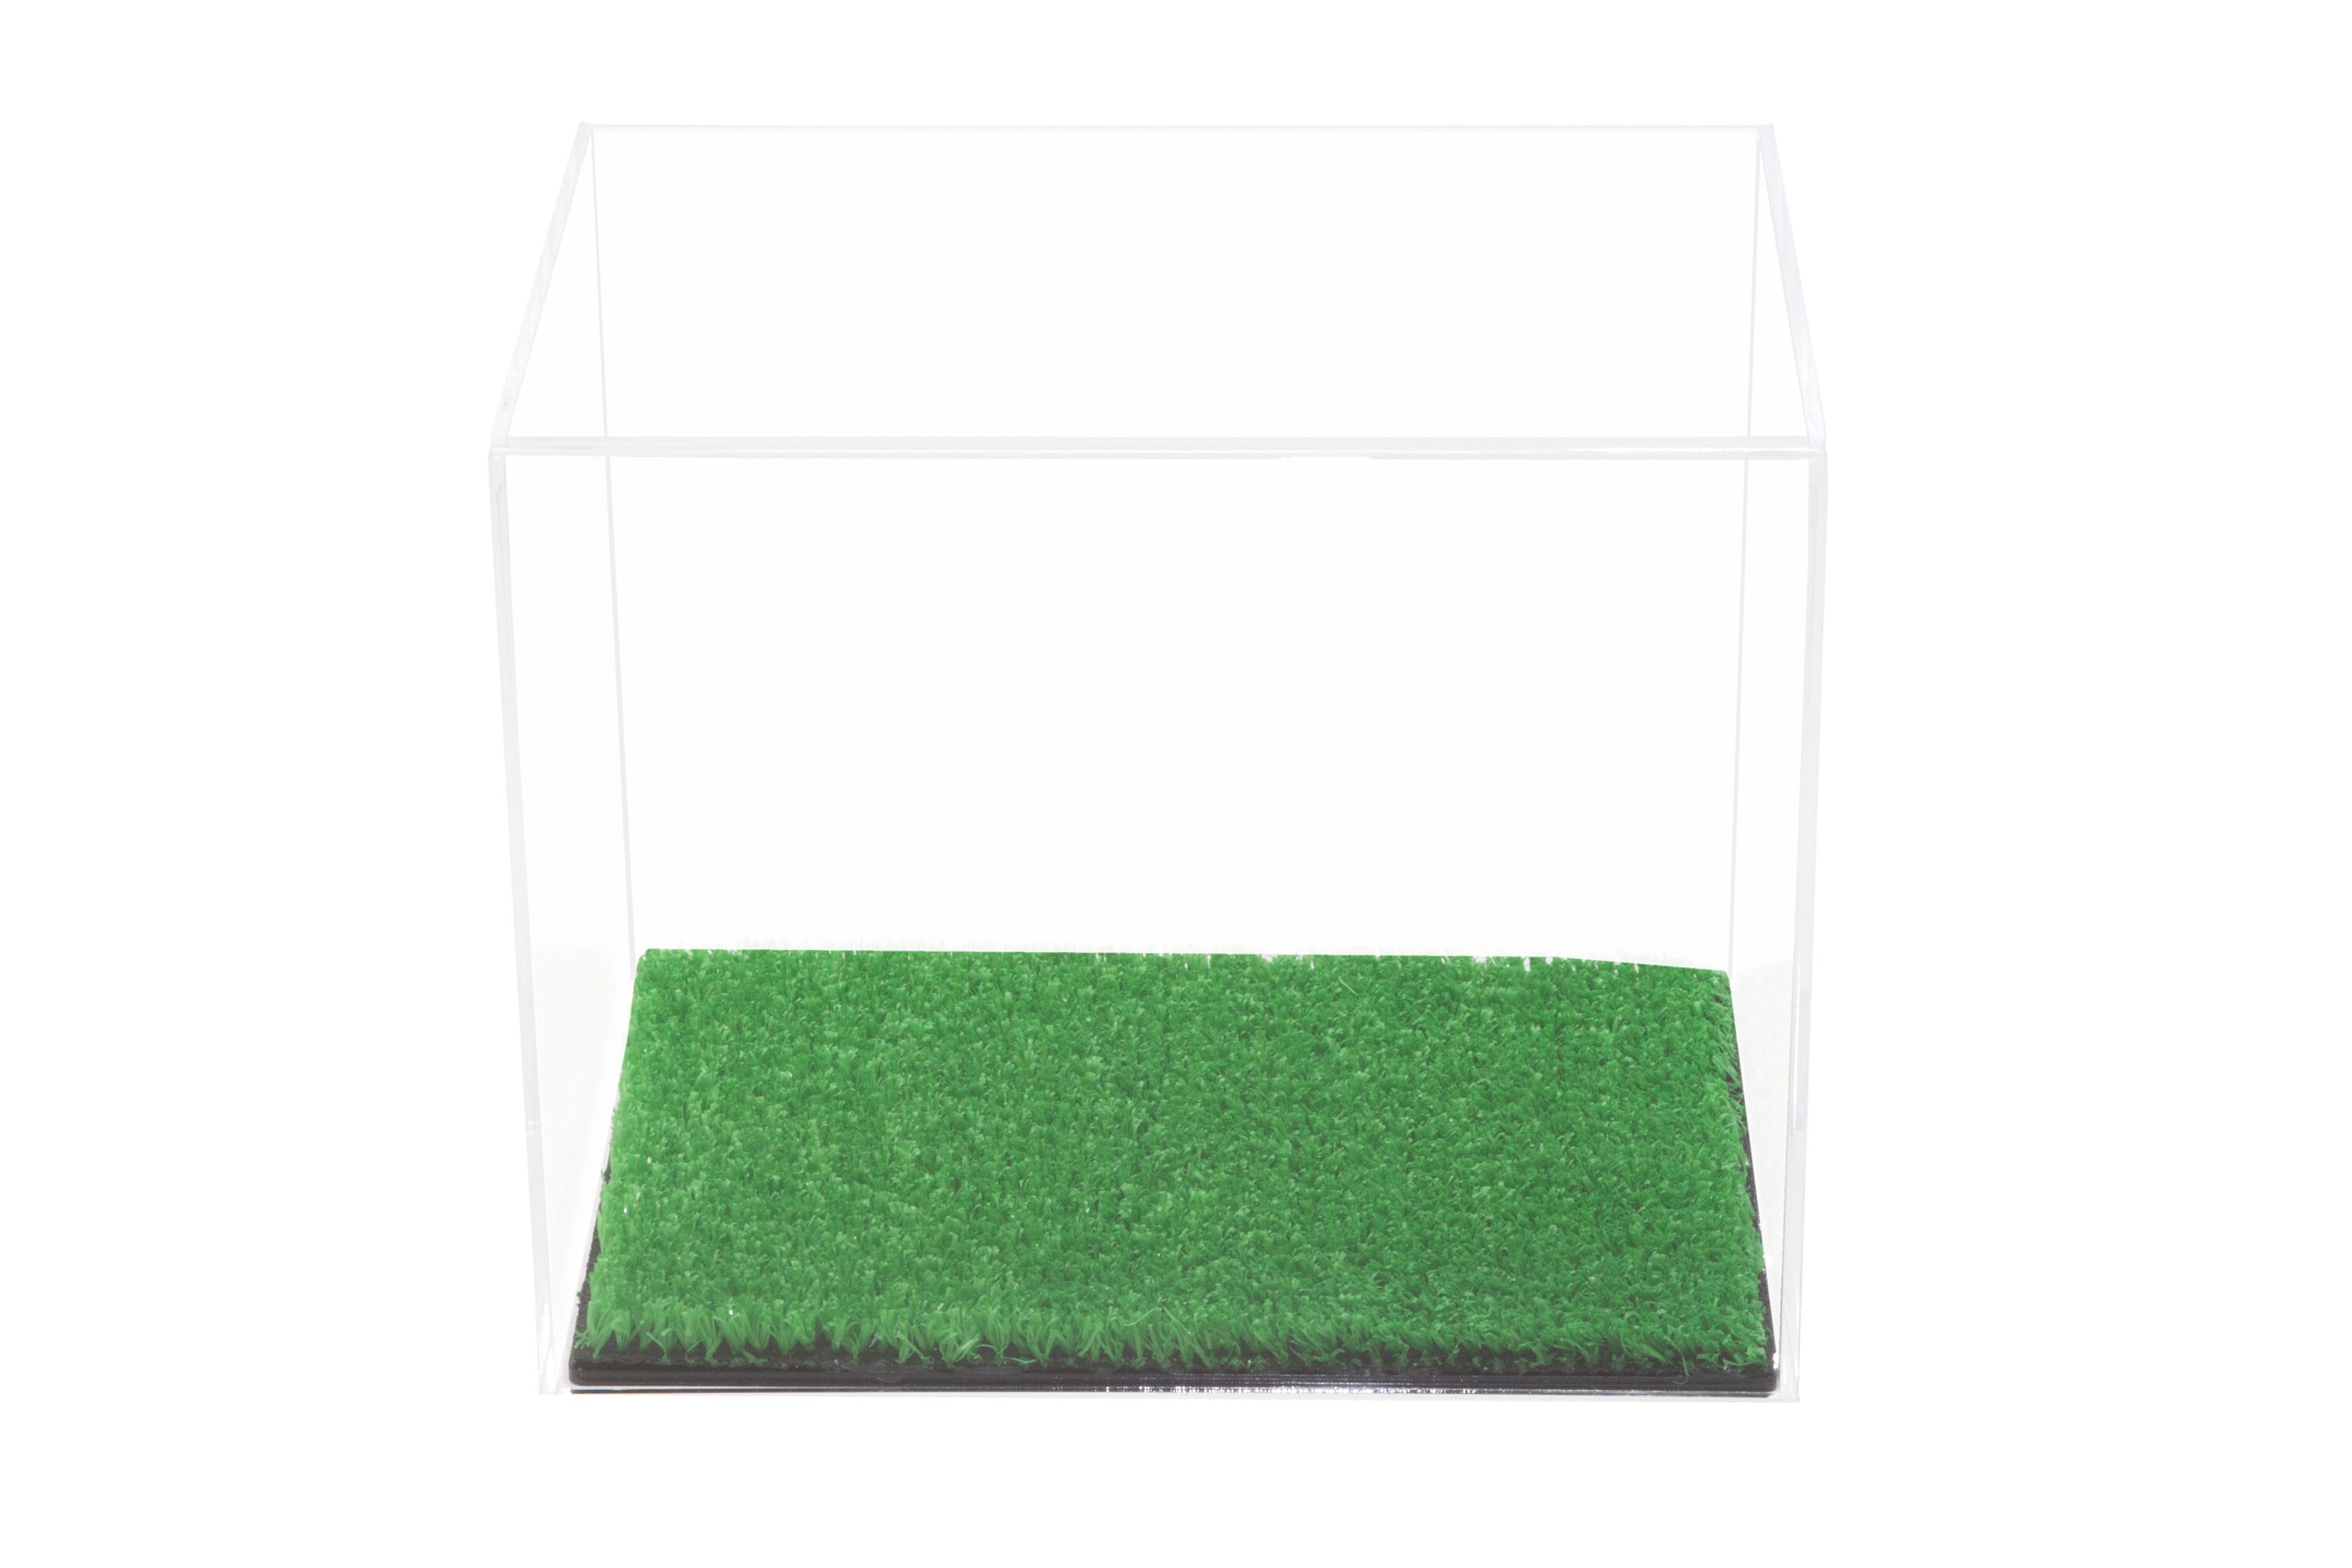 Mini Football Helmet Display Case not Full Size Better Display Cases  Acrylic Plexiglass With Turf Bottom clear or Mirror A003-TB 